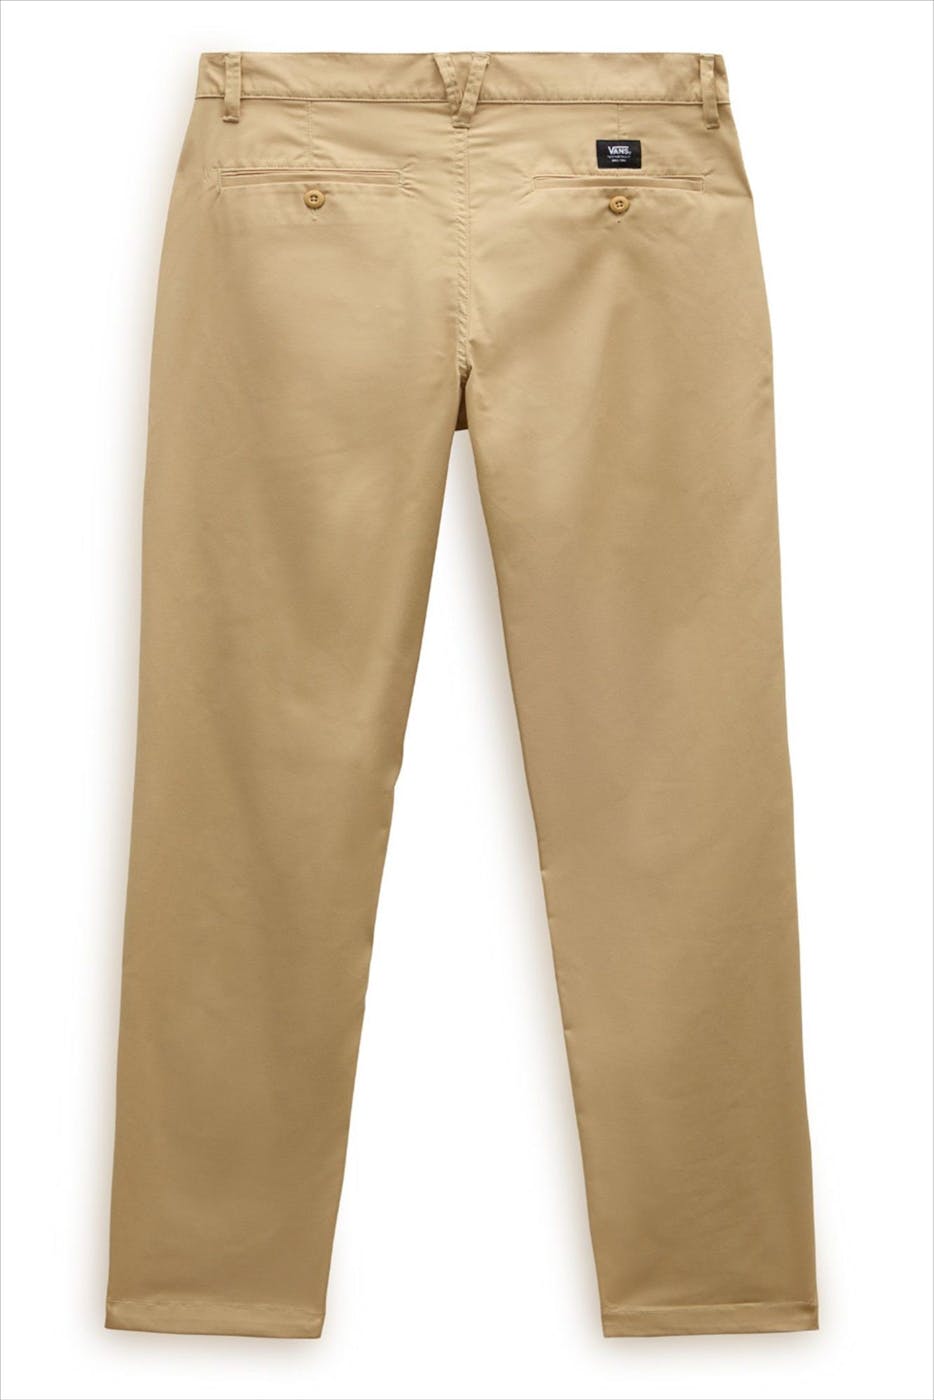 Vans  - Beige Authenic Relaxed chino